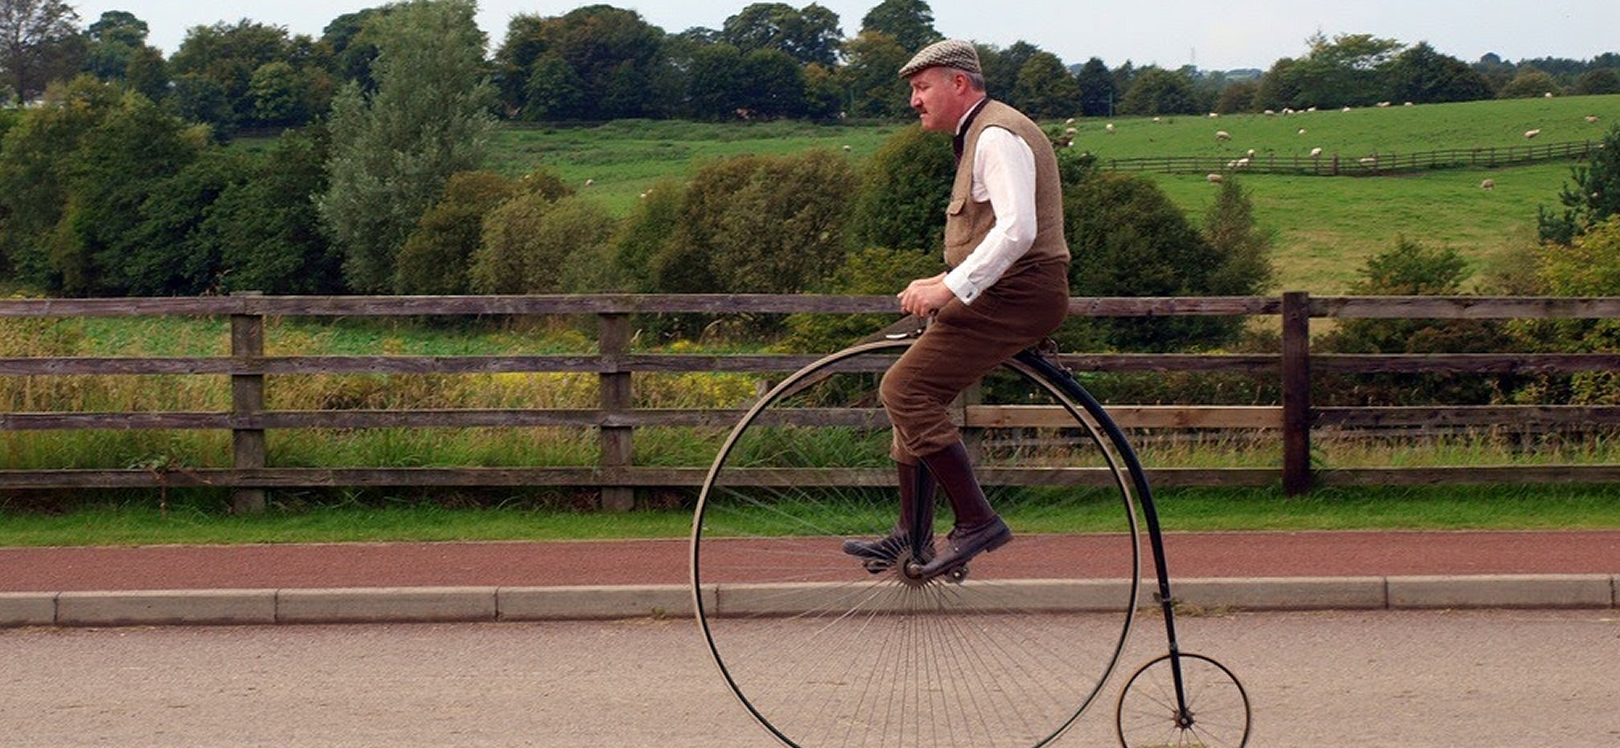 Ian Bean on his penny farthing. Credit: Beamish, The Living Museum of the North